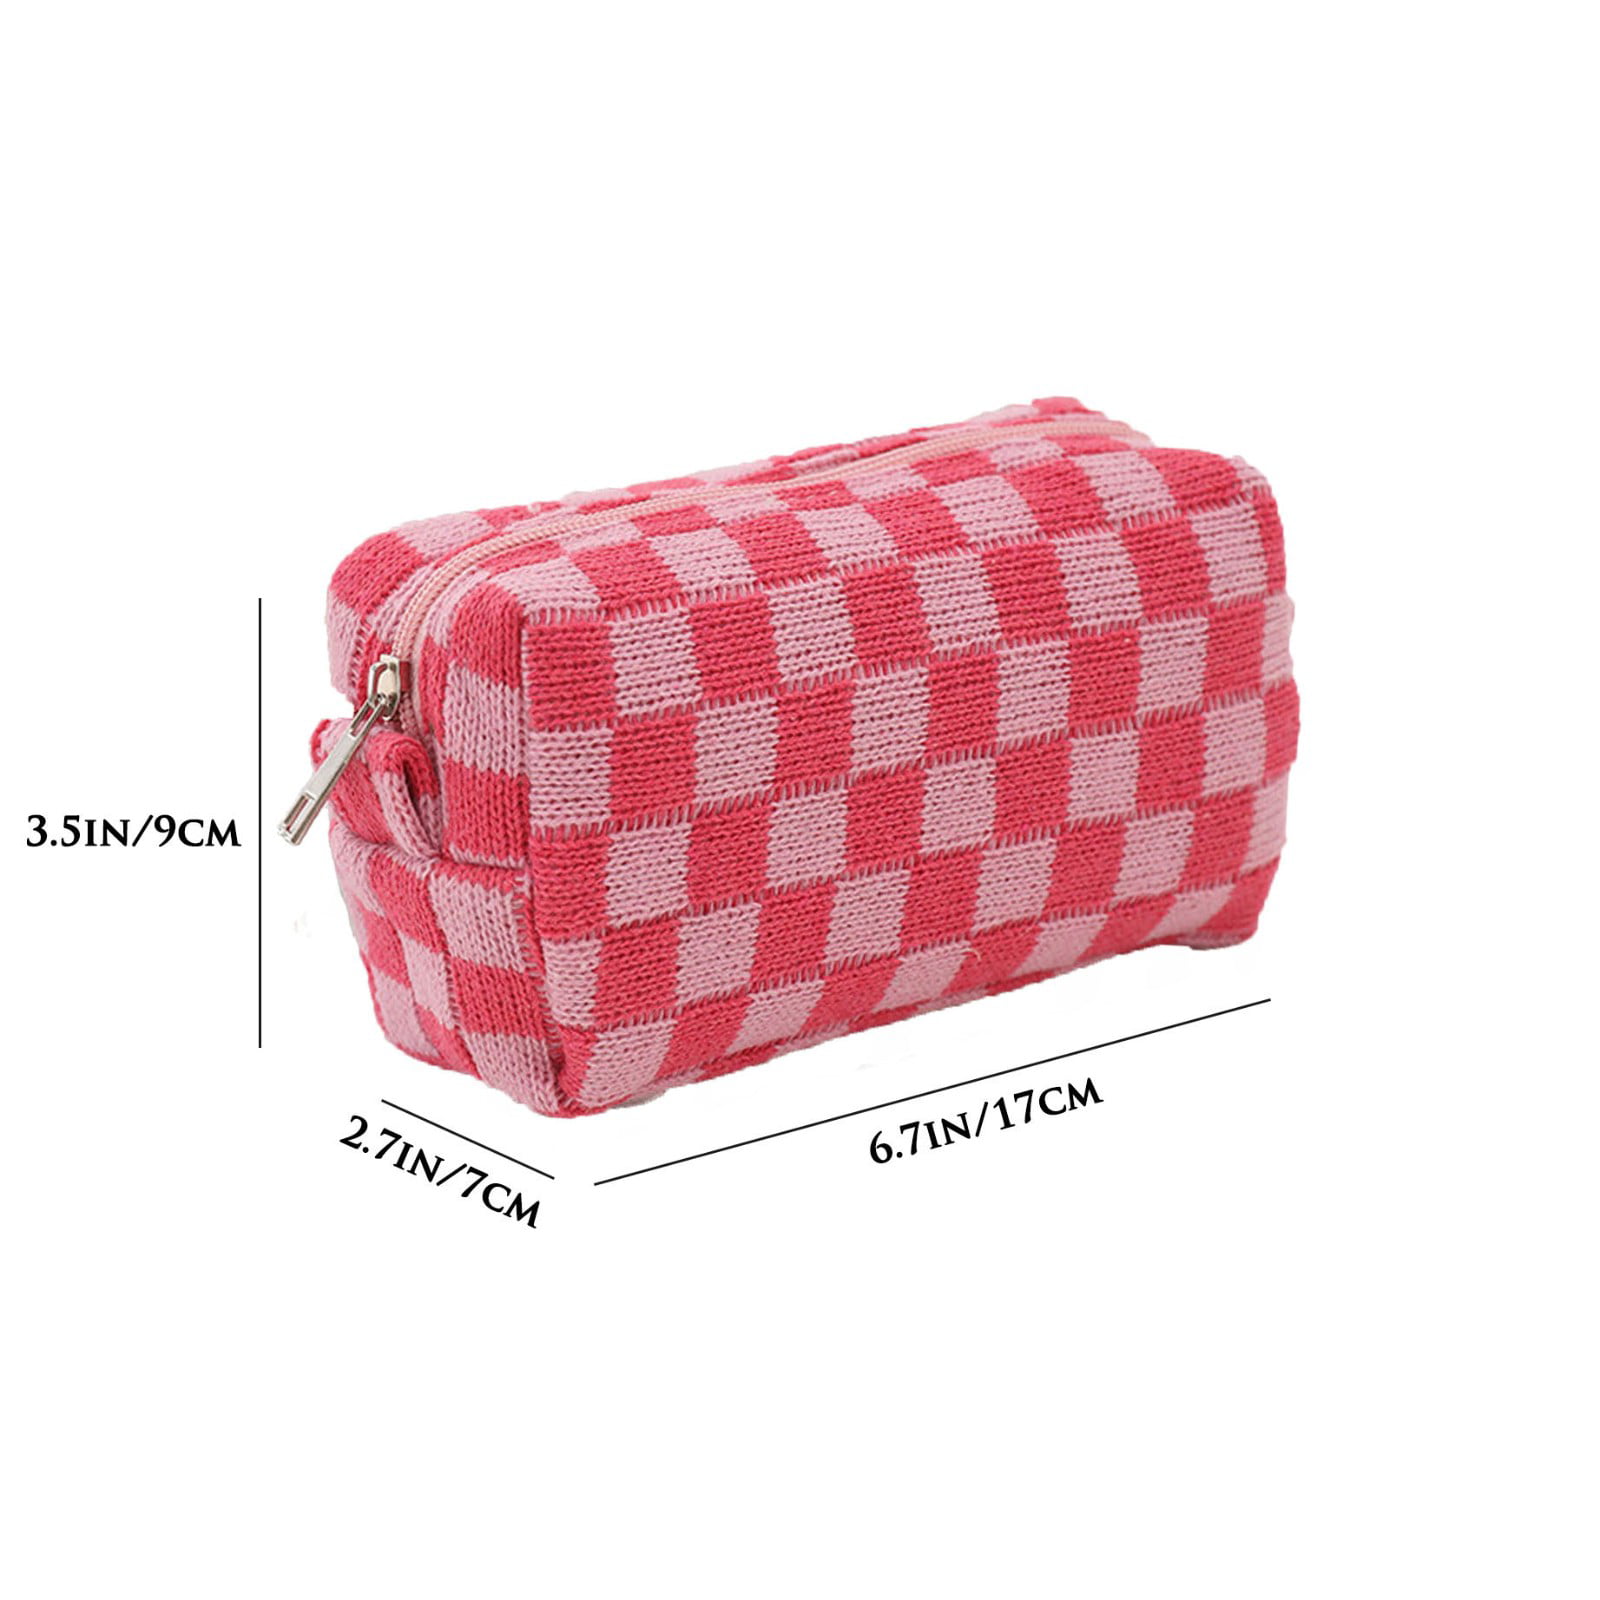 T.sheep Checkered Makeup Organizer Cosmetic Bags Woman Portable Toiletry Travel Bag with Adjustable Partition for Tools , Jewelry ,Brown